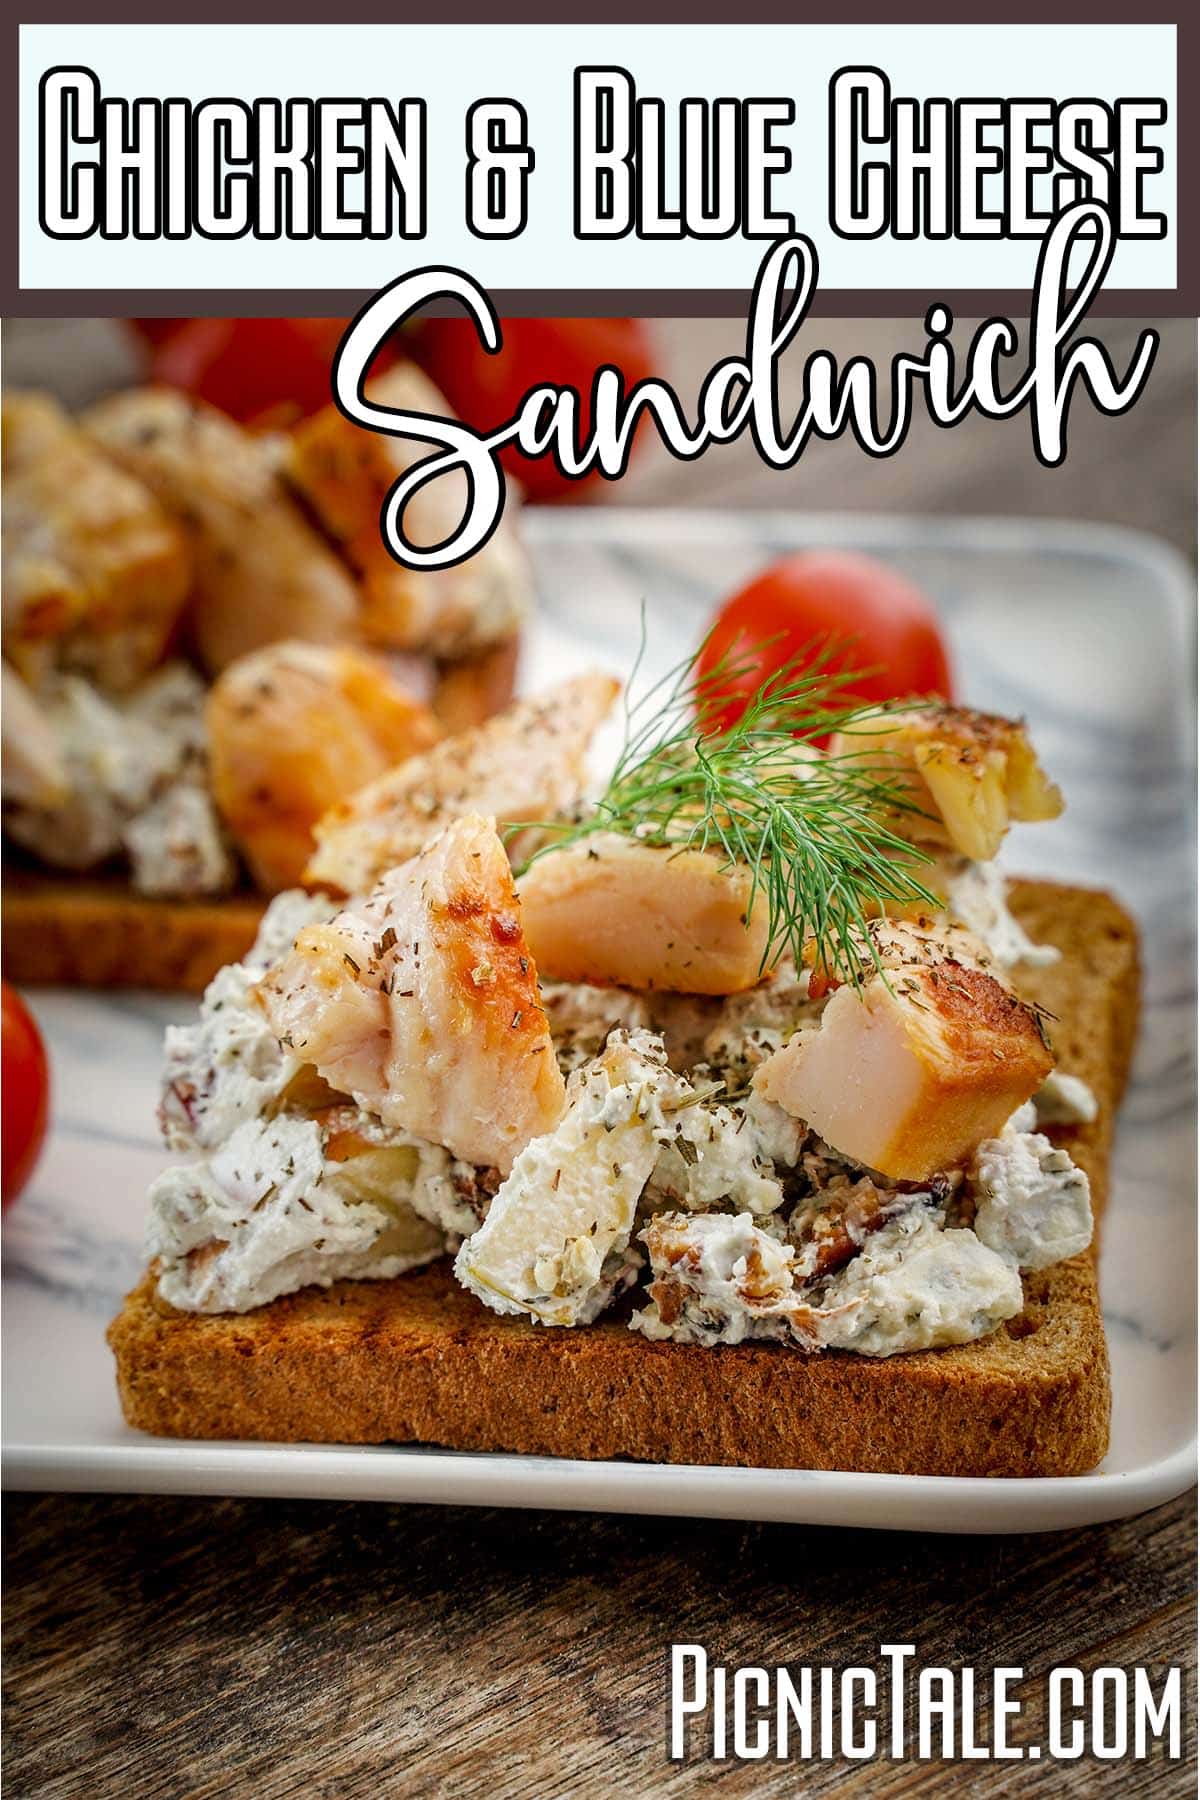 Chicken Blue Cheese and Walnut sandwiches on marble plate wording on top.